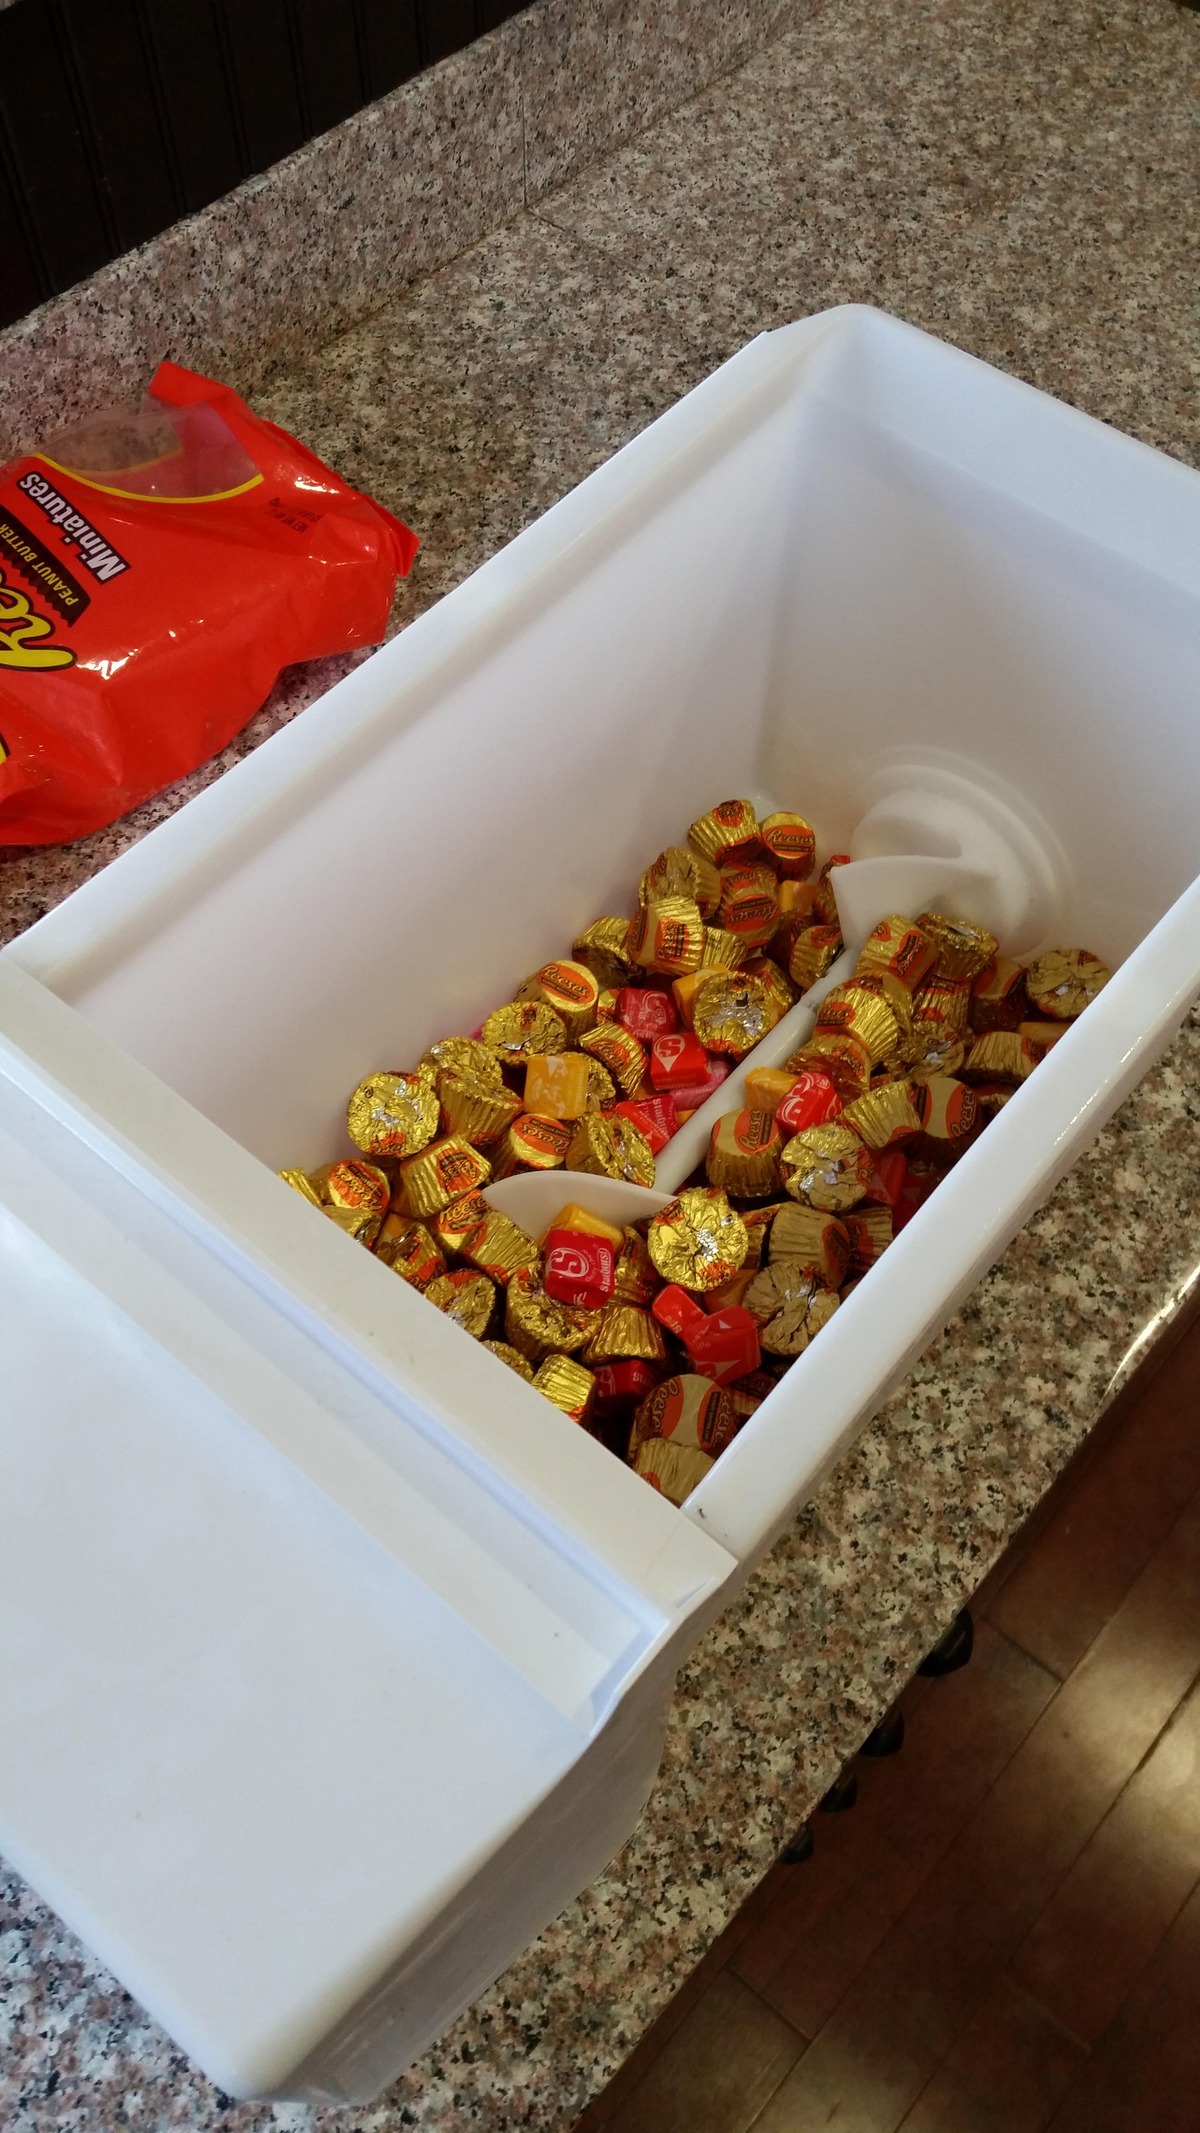 This Guy Turned His Automatic Icemaker into a Frozen Candy Dispenser